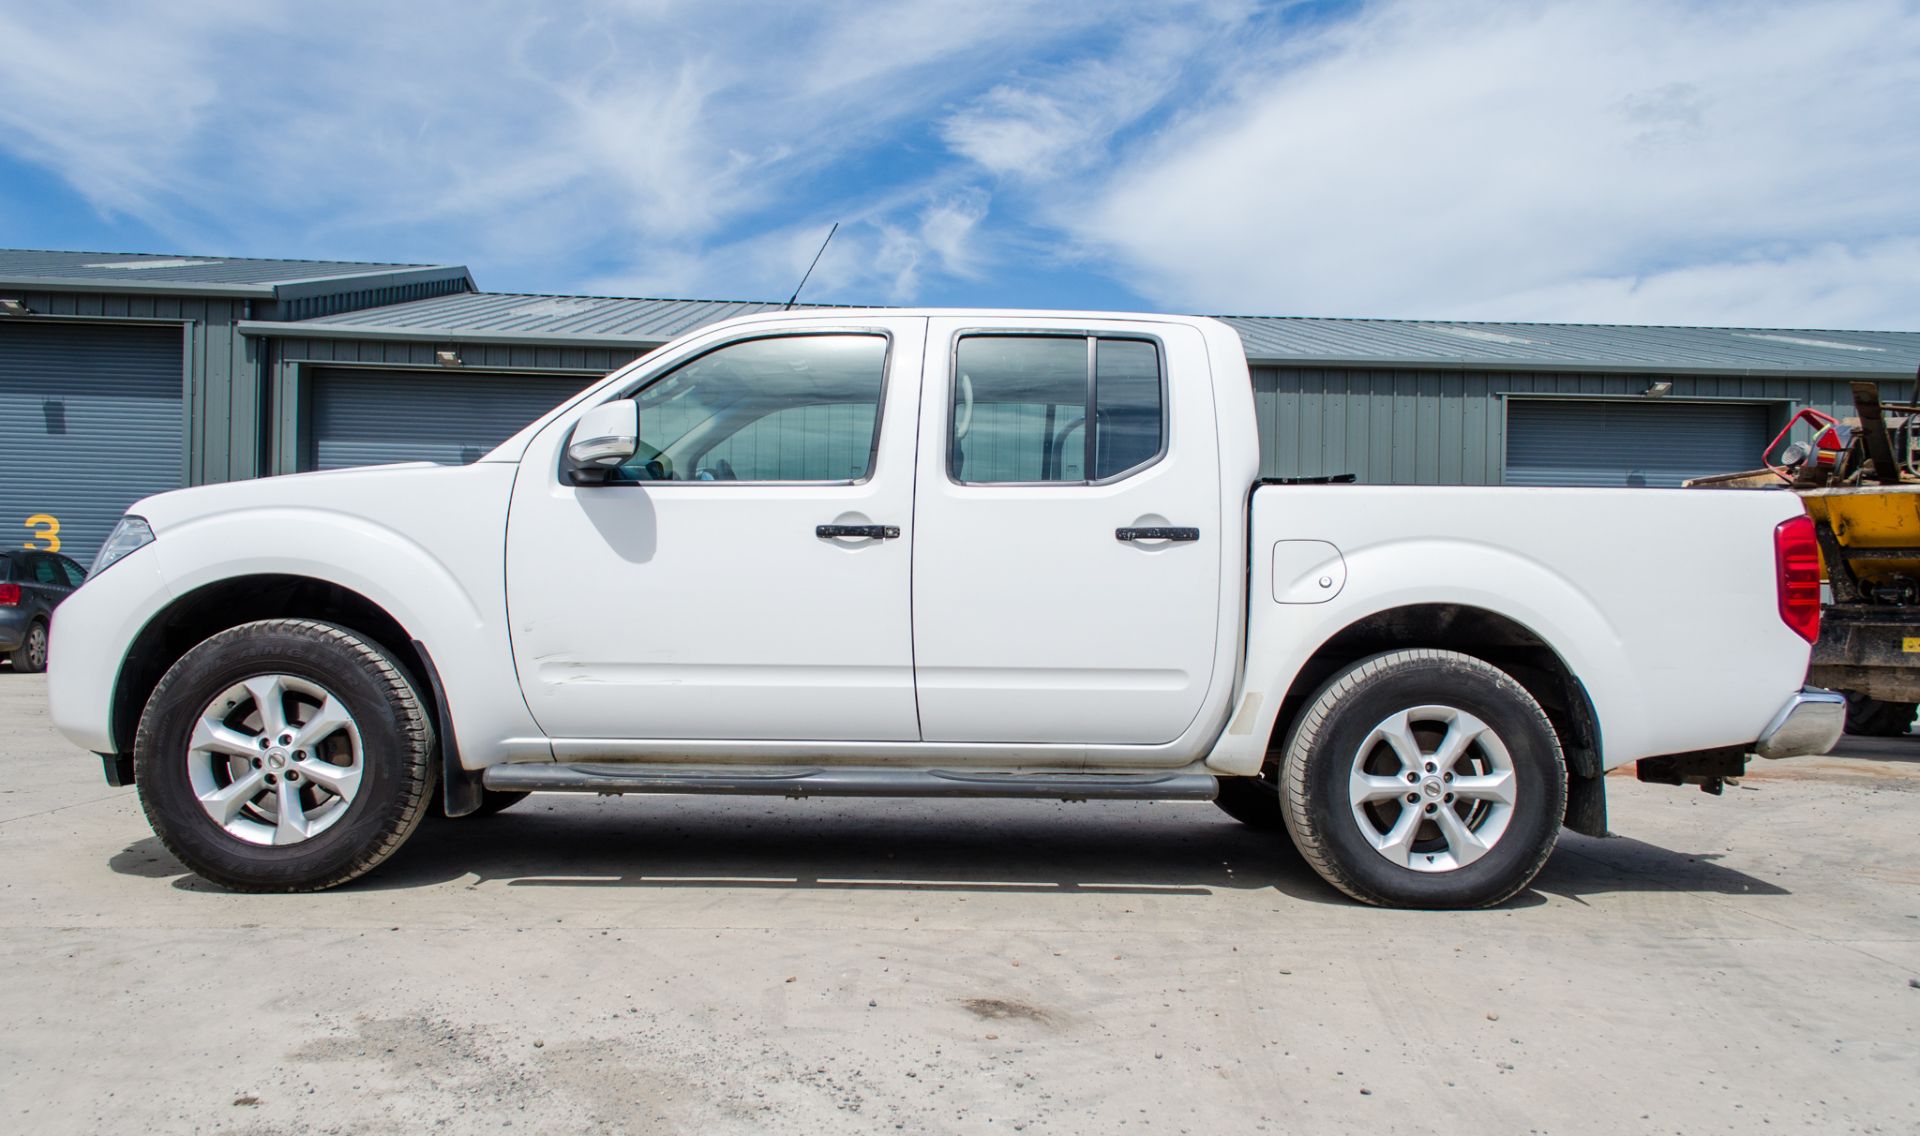 Nissan Navara Acenta DCI 6 speed manual double cab pick up Registration Number: DF63 HPP Date of - Image 7 of 31